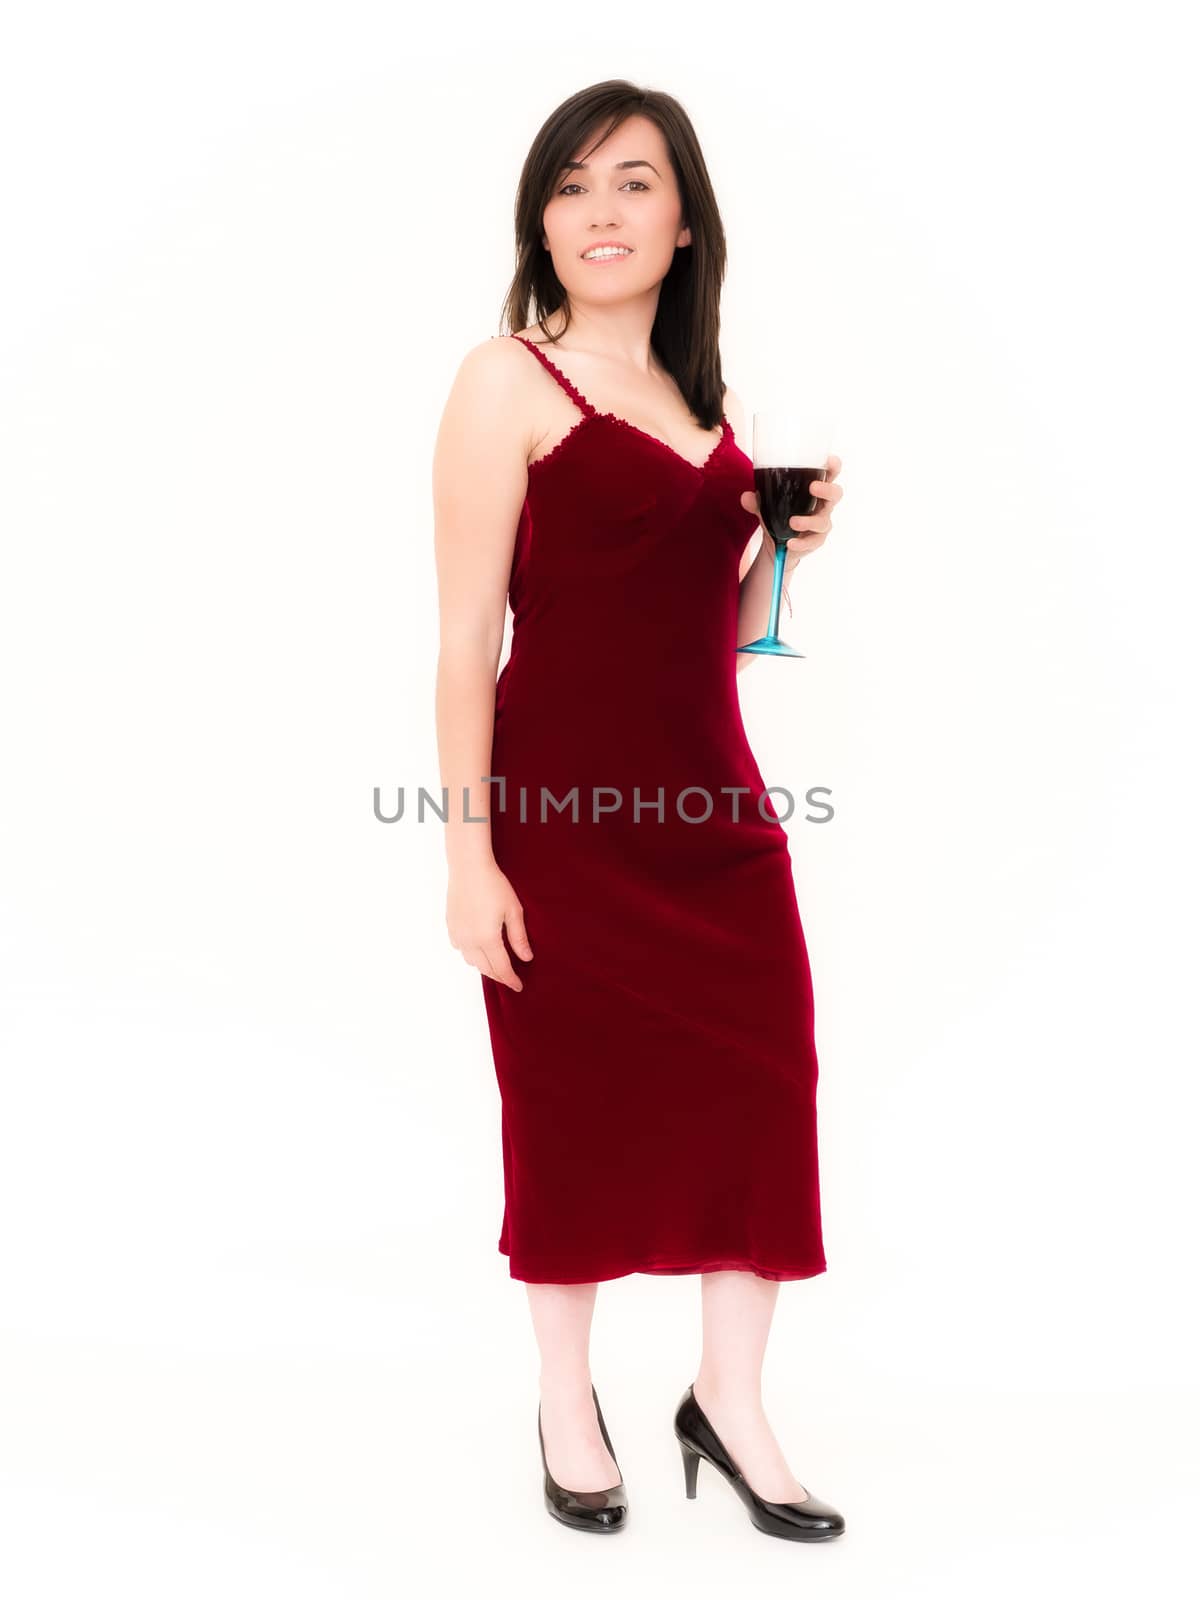 Beautiful Woman in a Red Dress Holding a Red Wine